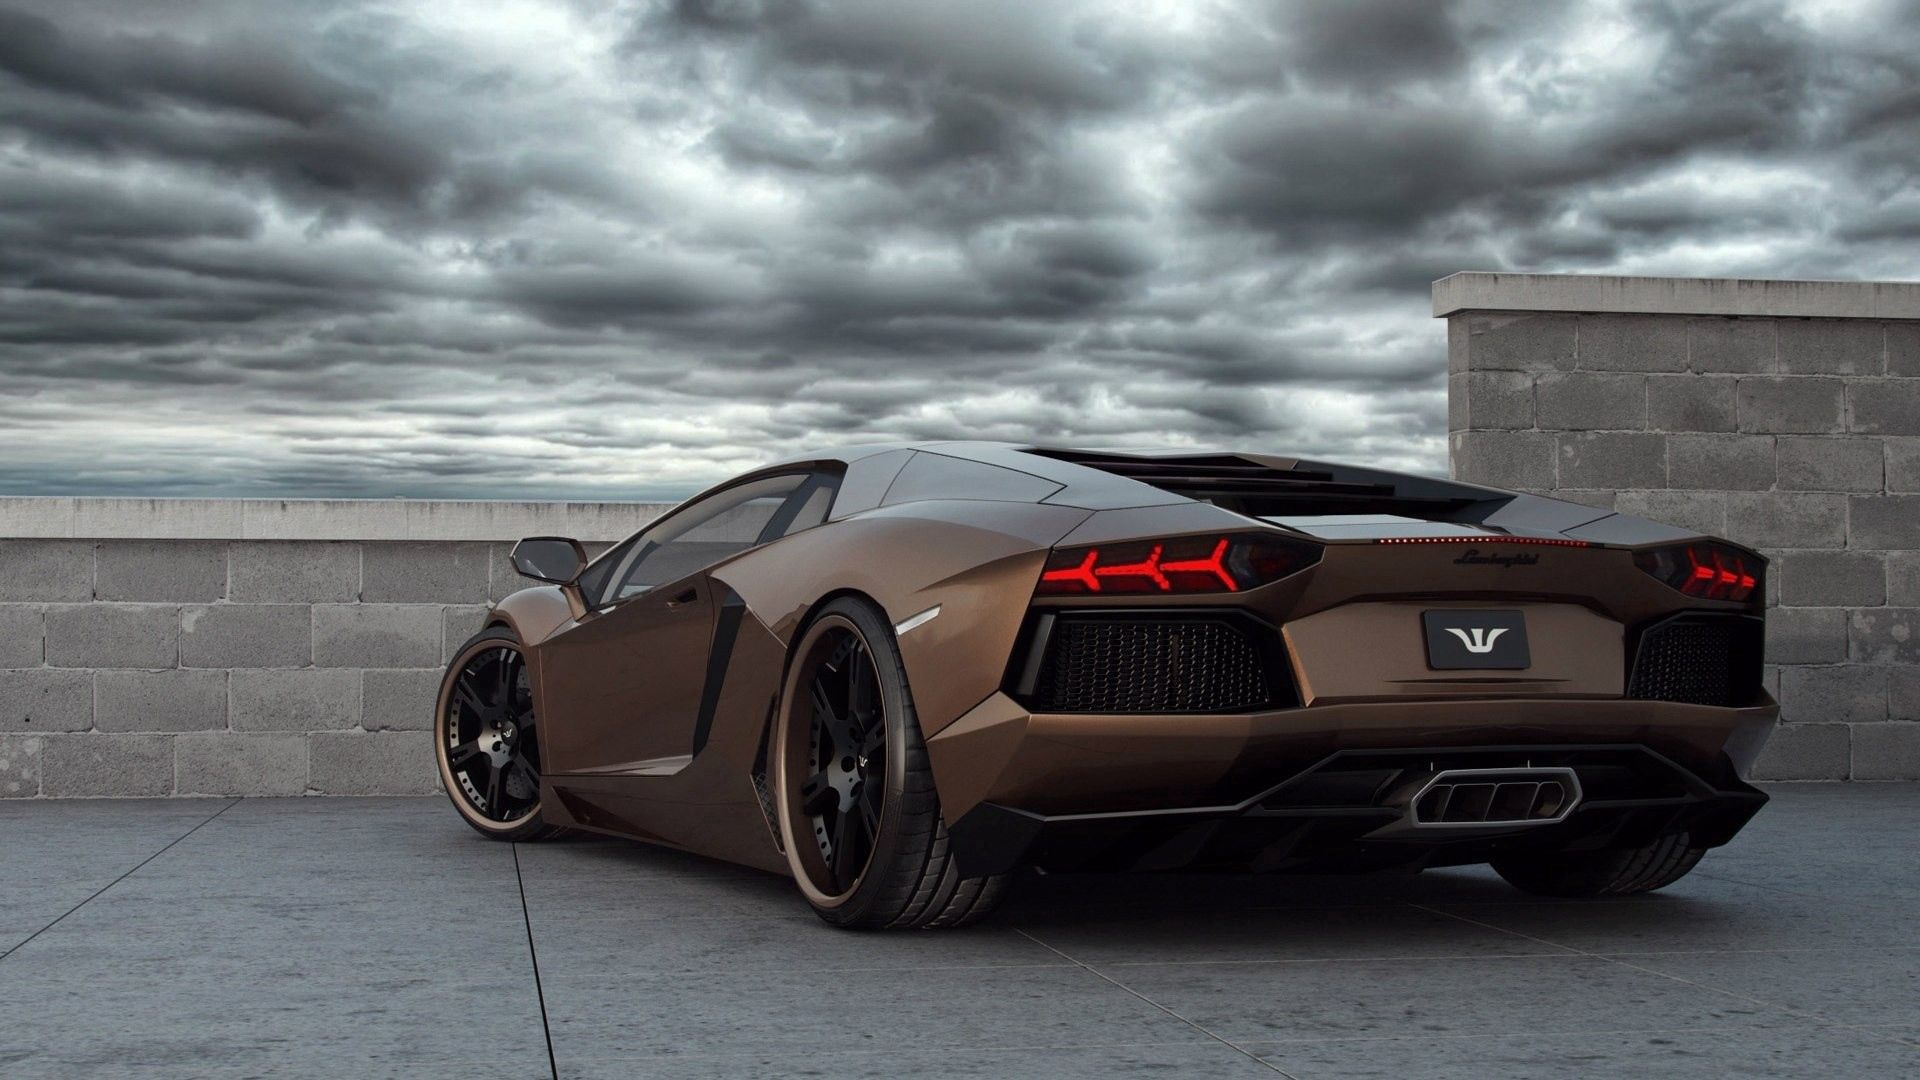 110134 download wallpaper color, auto, sky, lamborghini, cars, city screensavers and pictures for free